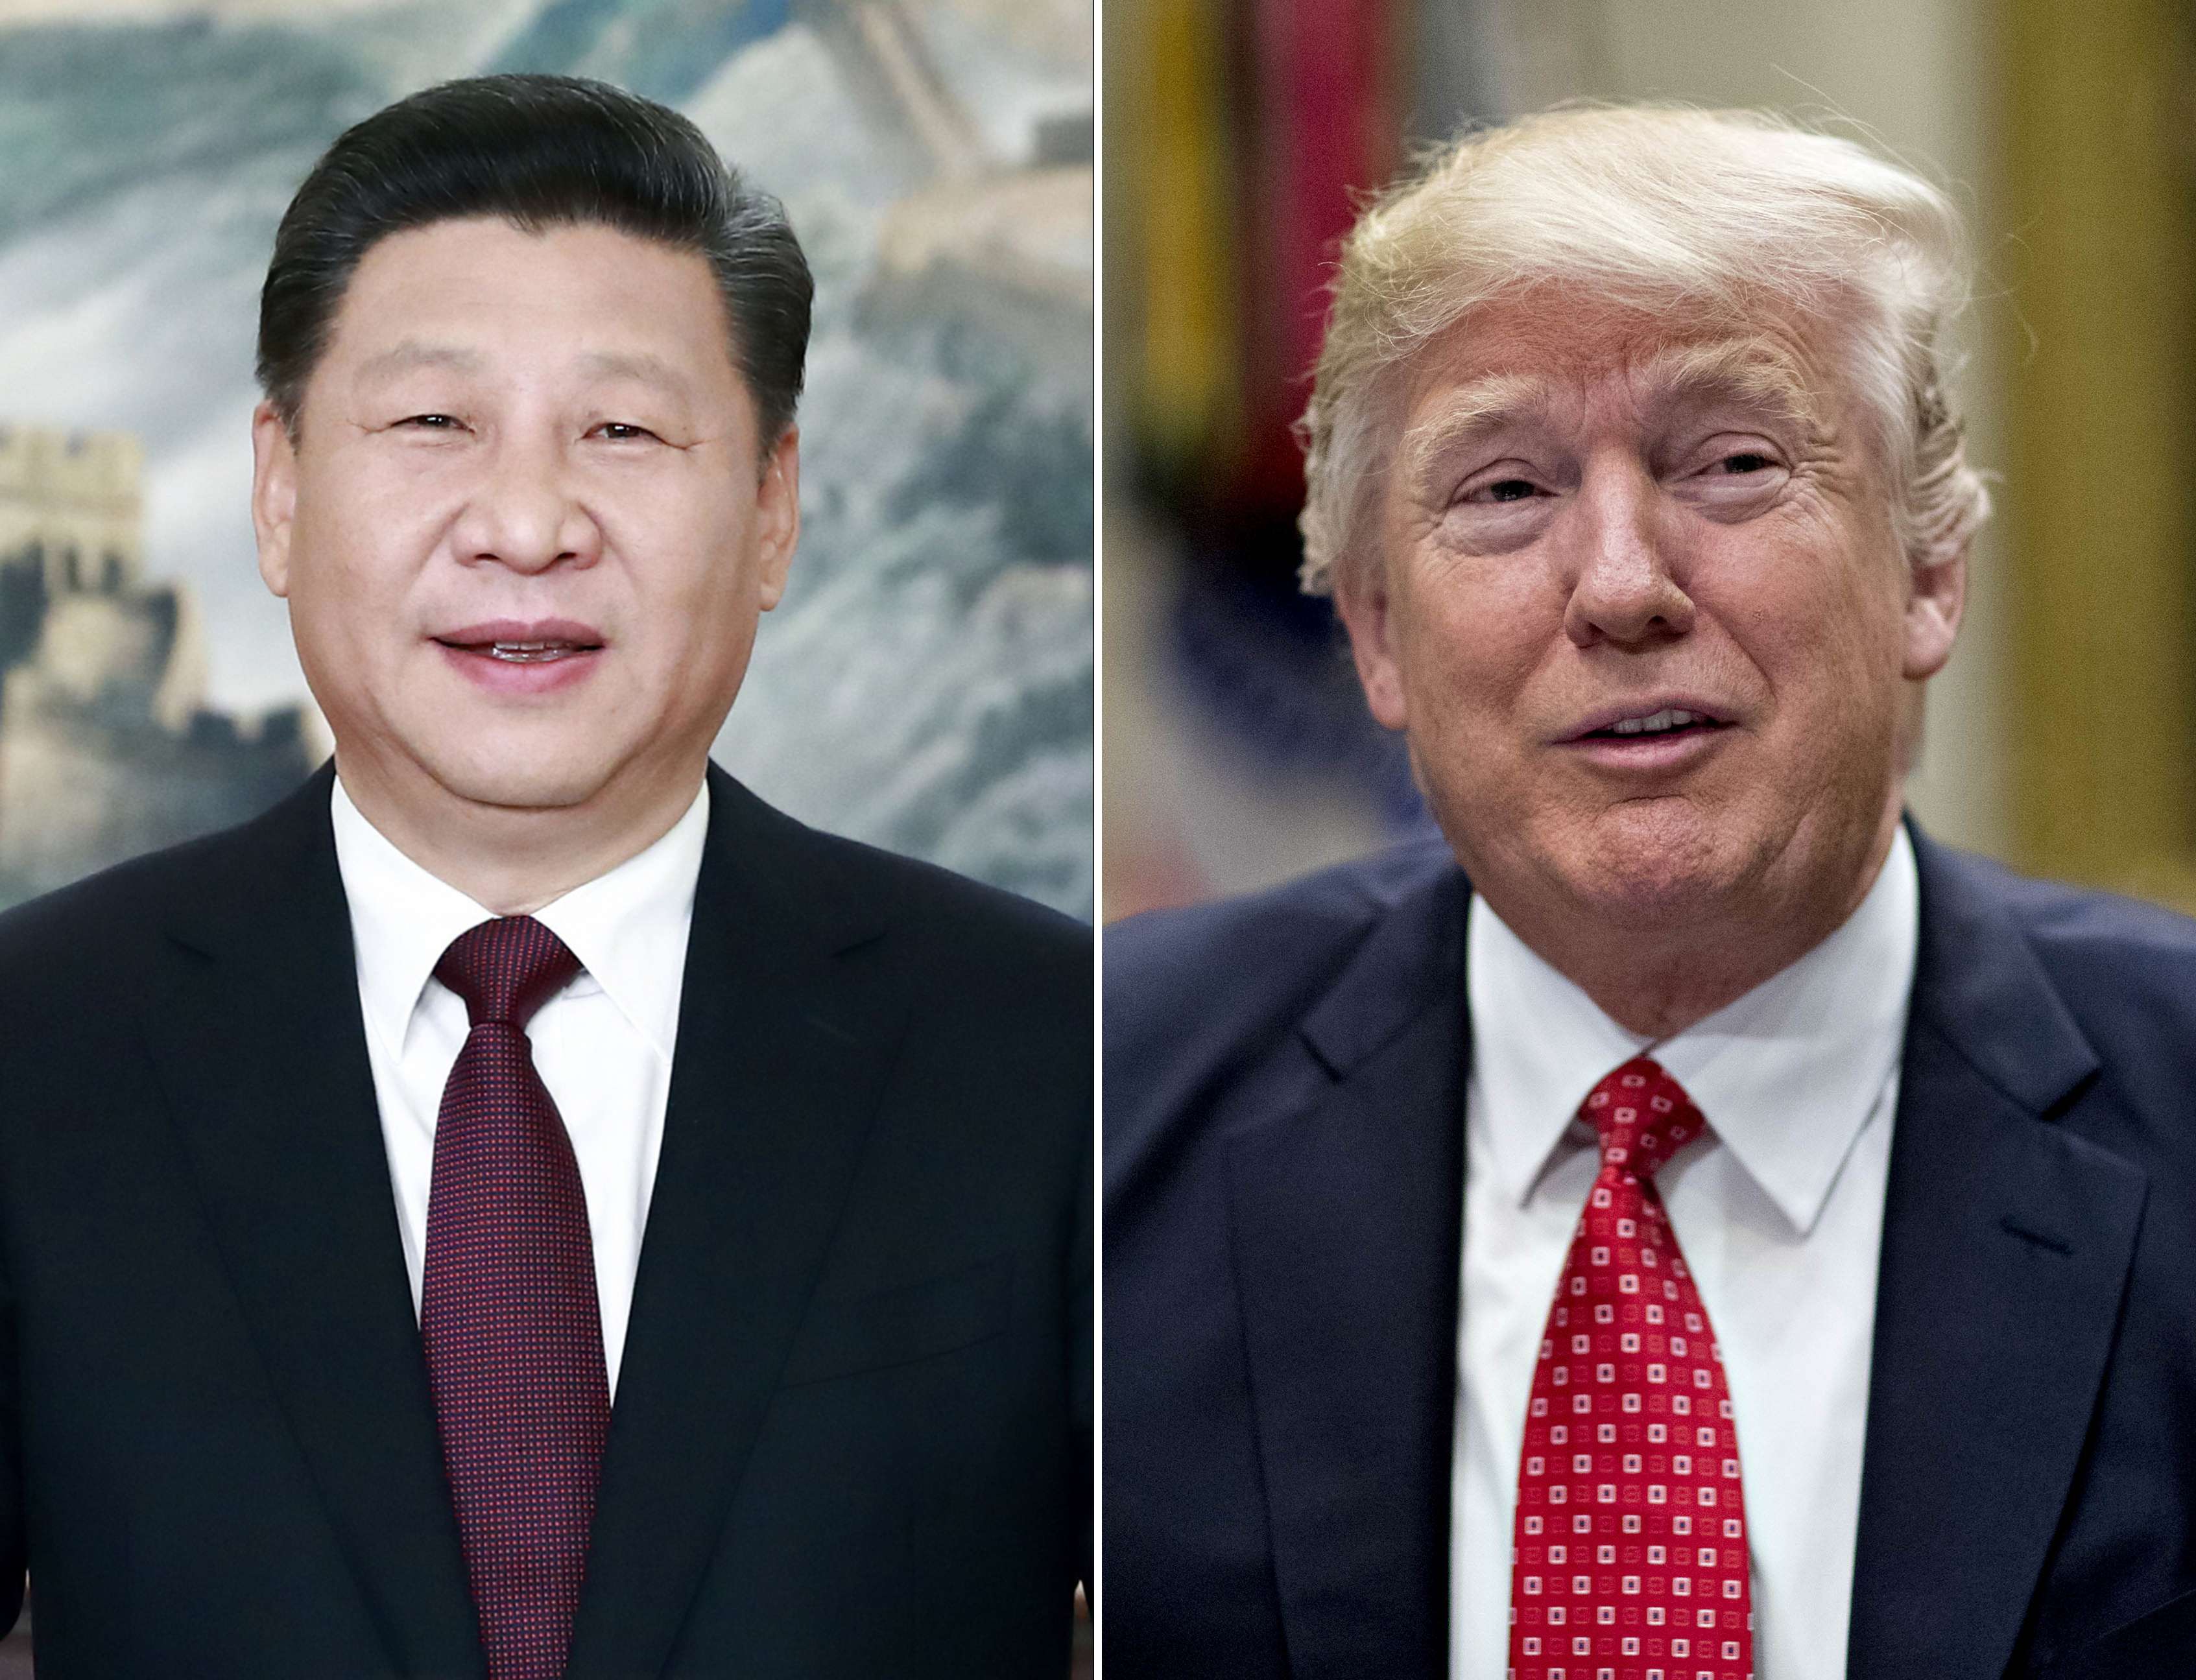 After initial hiccups, Xi Jinping and Donald Trump are set to meet as early as next month at the US president’s Mar-a-Lago estate in Palm Beach, Florida. The two leaders must see in their newfound warmth an opportunity for a wide-ranging agreement between the US and China. Photo: Handout